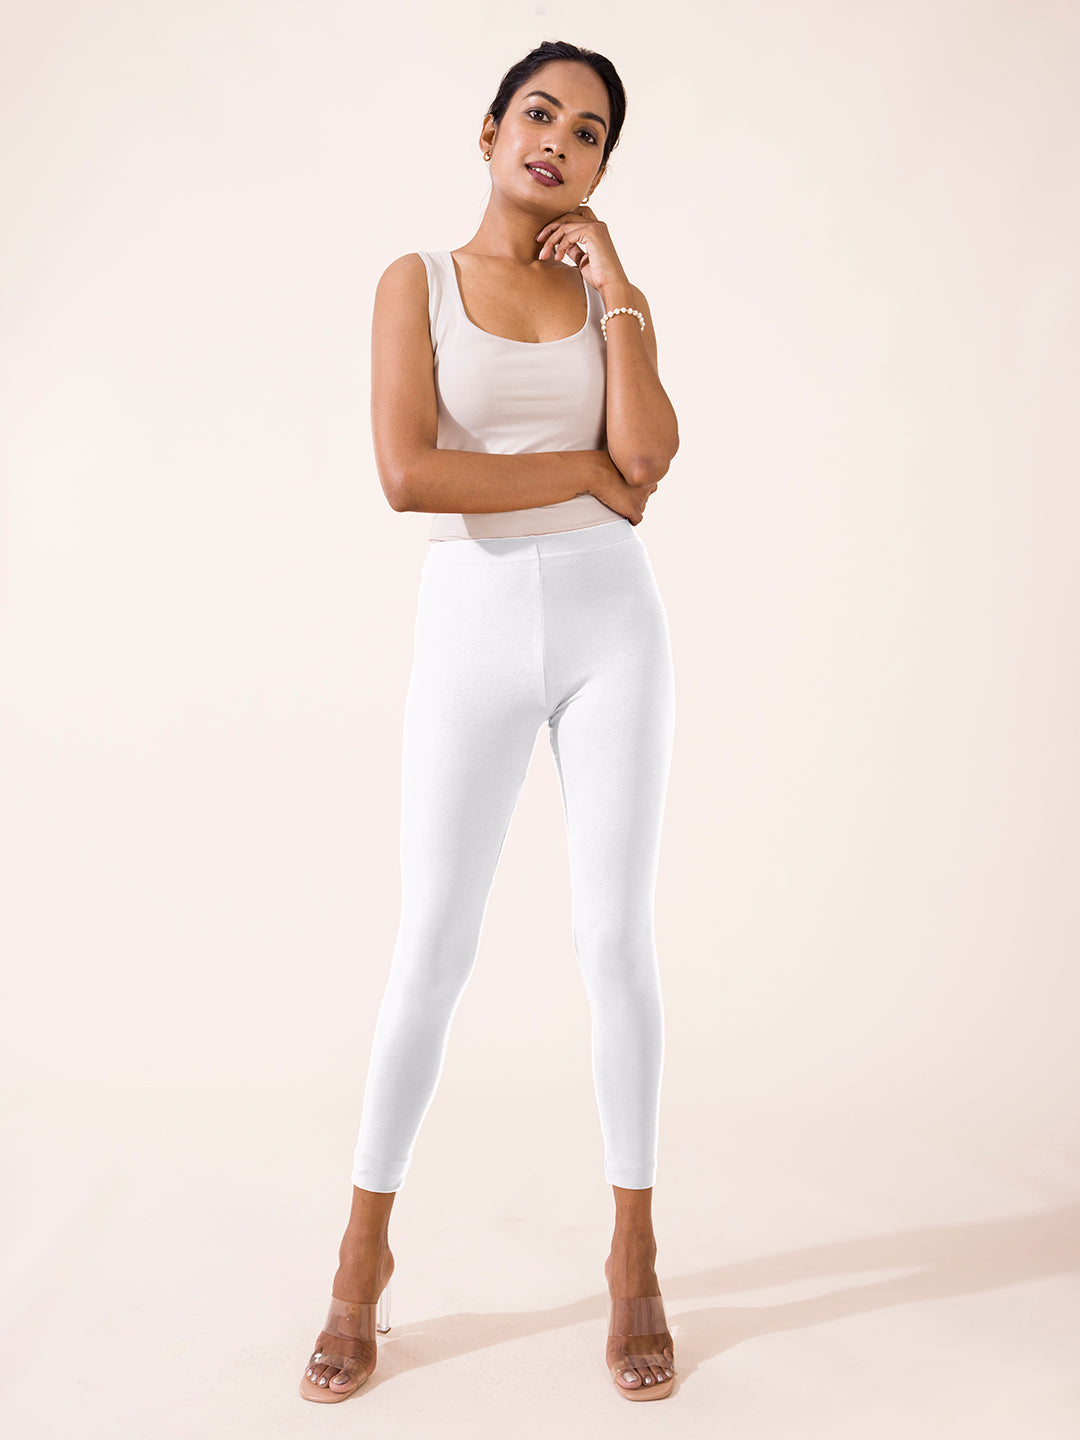 Buy Activewear Ankle Length Tights in Black Online India, Best